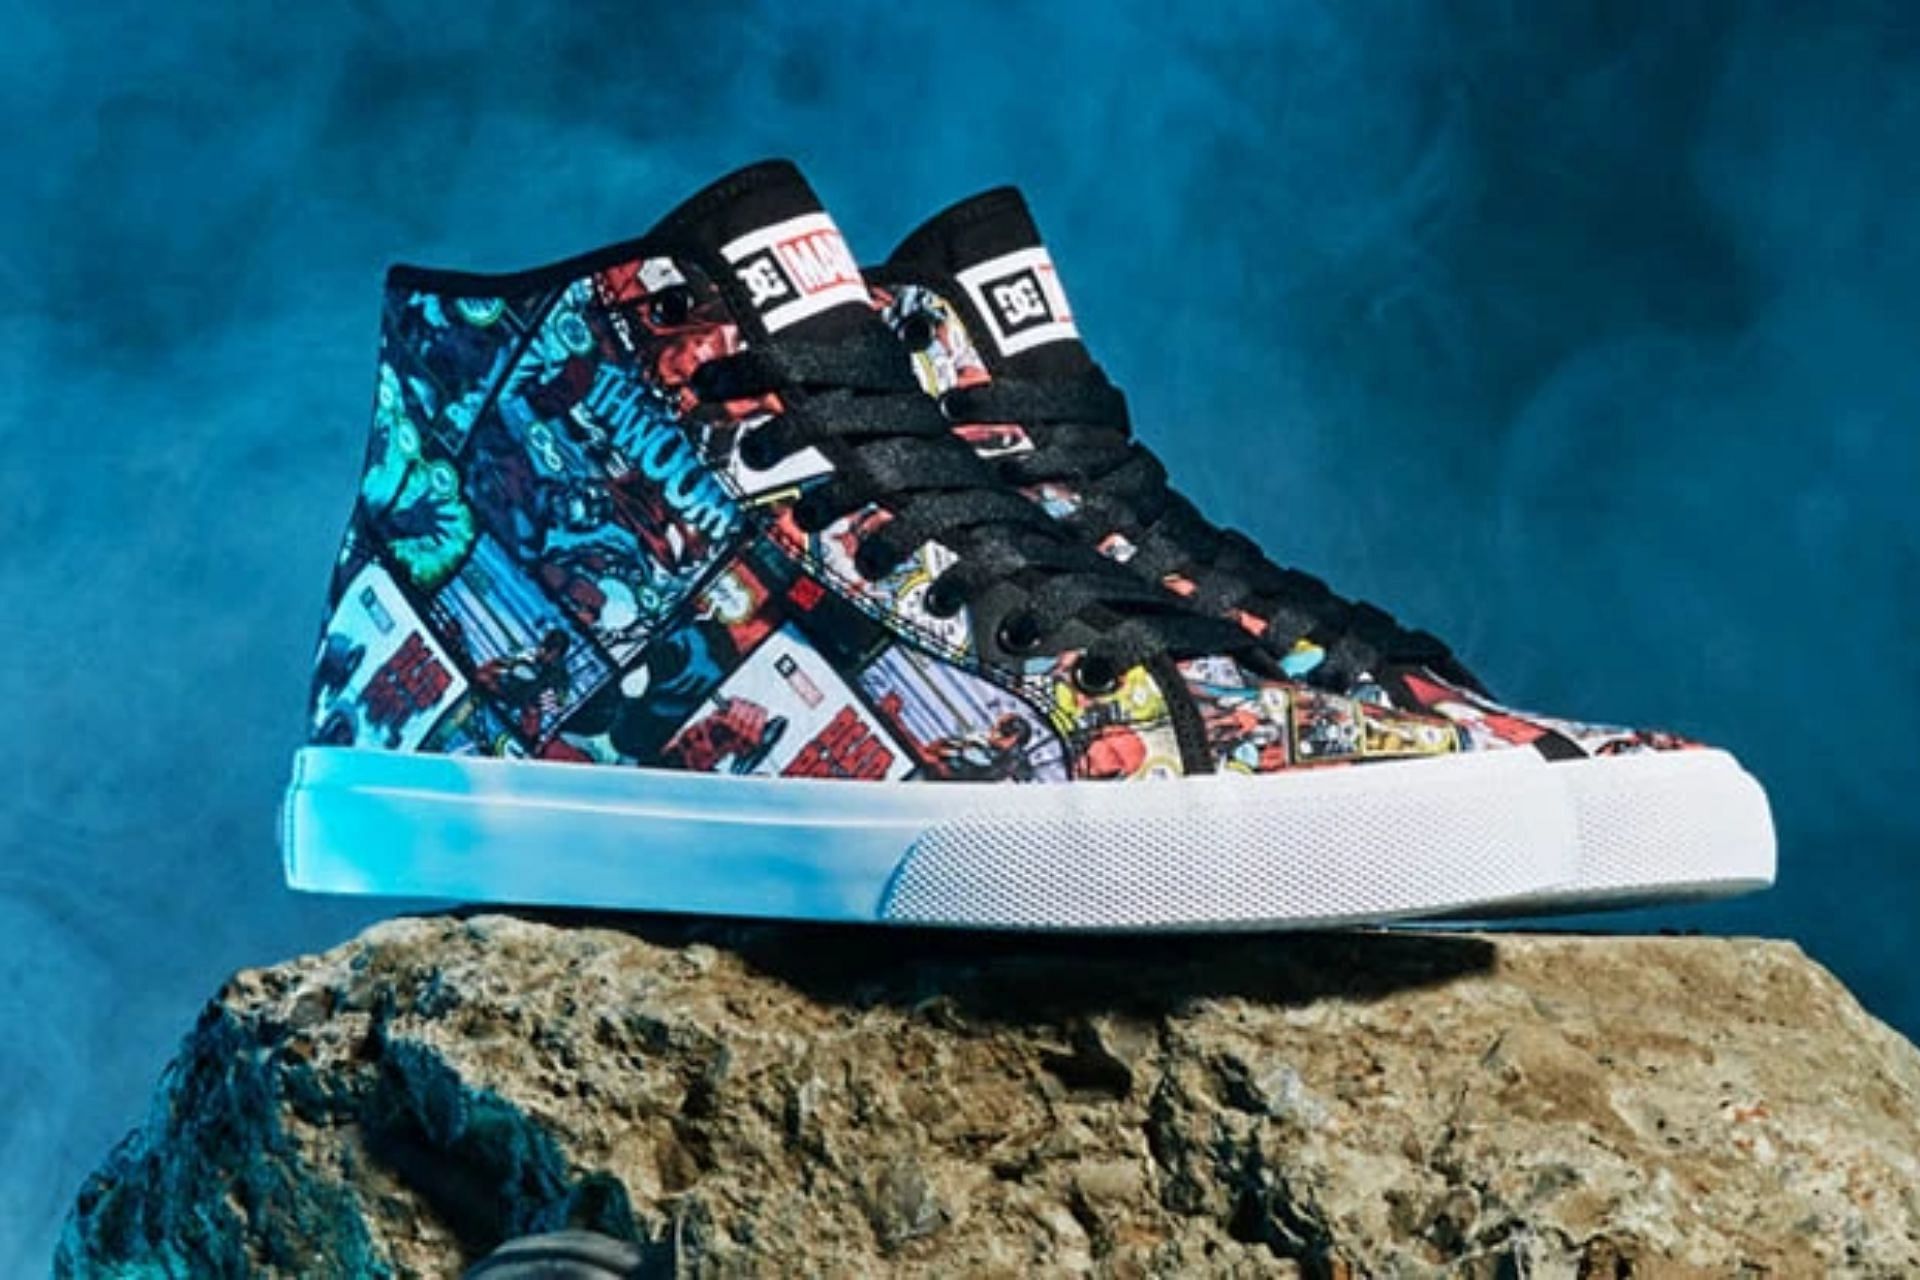 Where to buy Marvel x DC Shoes Offbeat “DeadPool” collection? Release ...